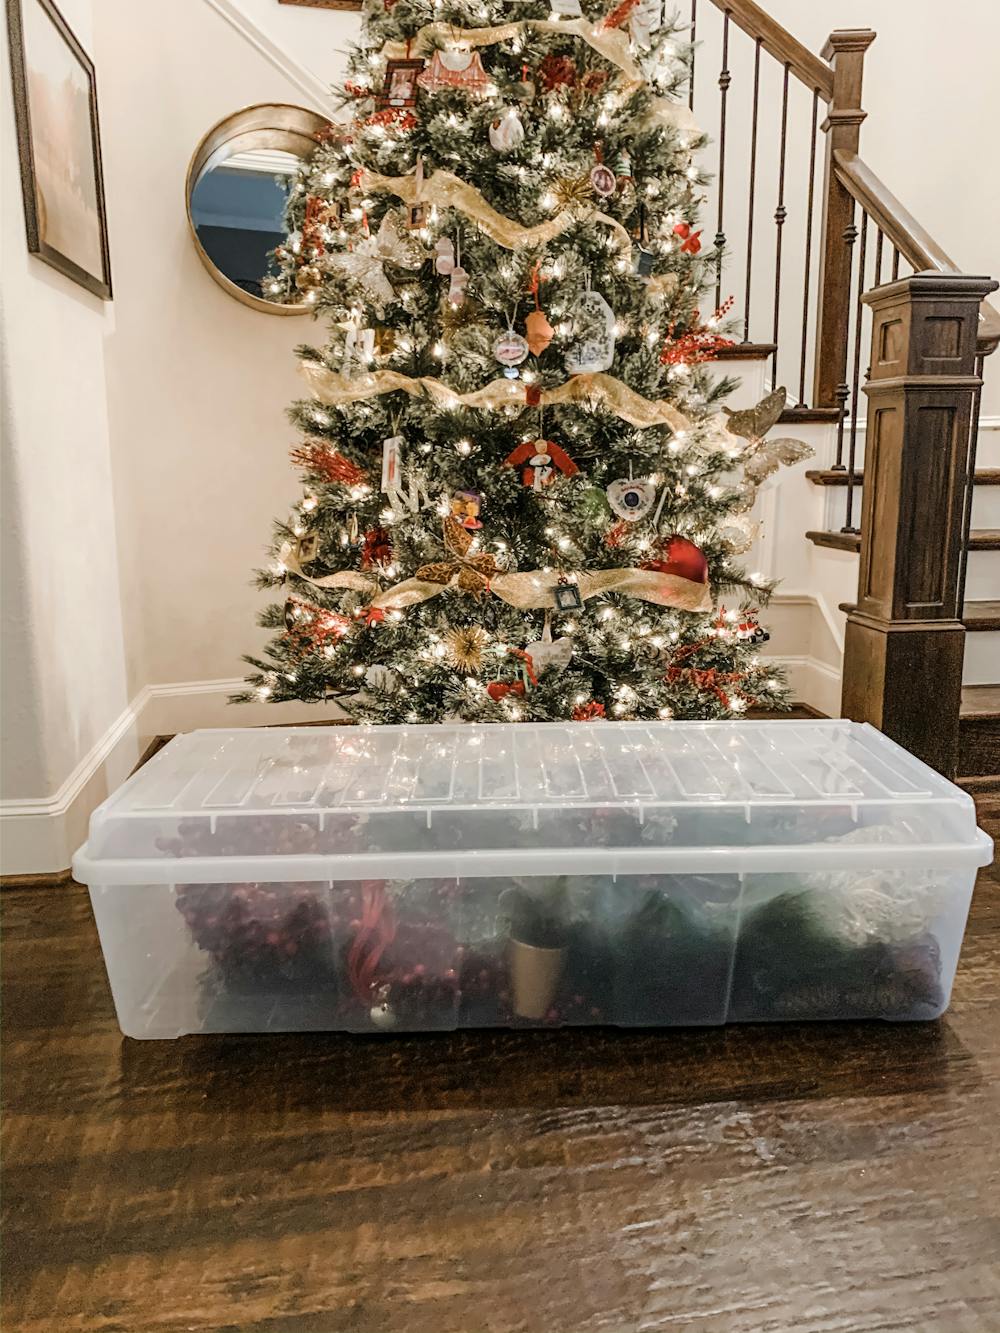 9 Christmas Trends That Will Be Huge in 2022  Christmas ornament storage,  Storing holiday decorations, Ornament storage